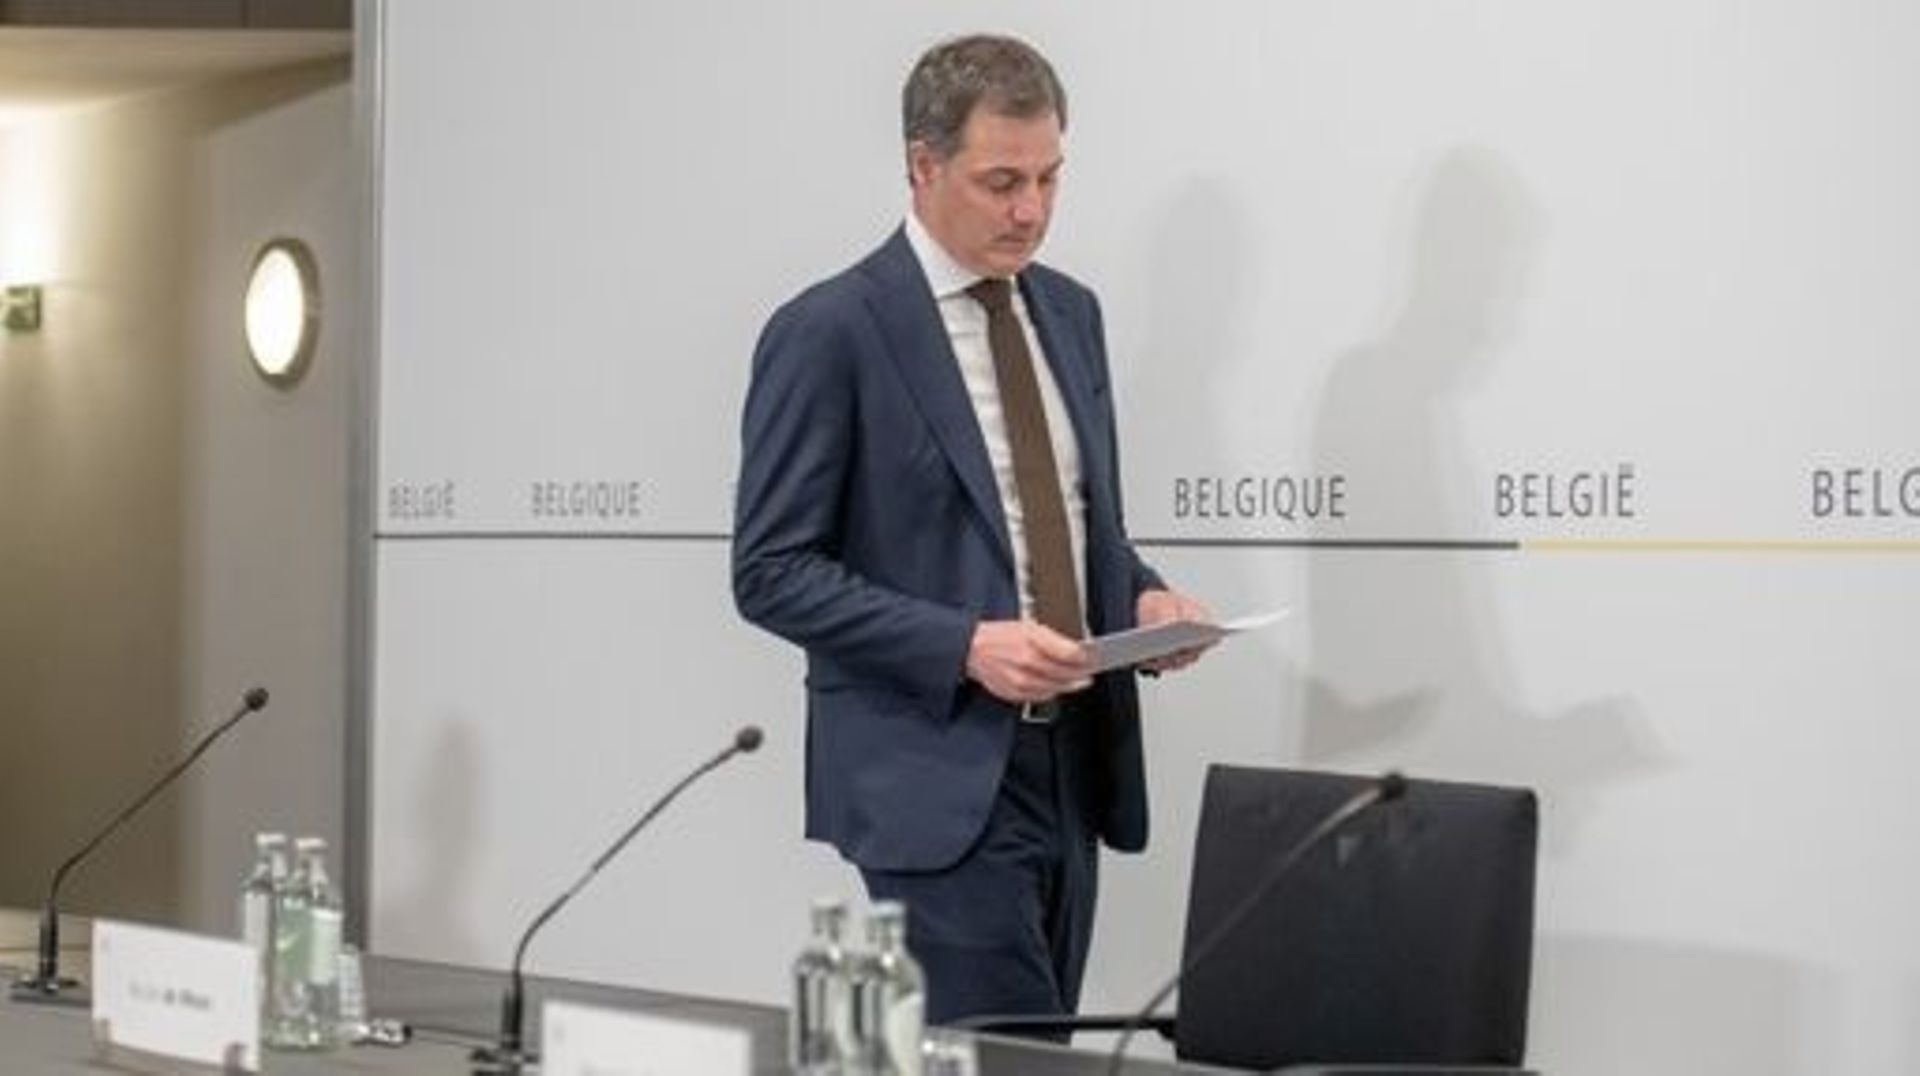 Prime Minister Alexander De Croo pictured during a press conference on the asylum issues after the agreement reached by the government in Brussels, Thursday 09 March 2023. BELGA PHOTO JONAS ROOSENS